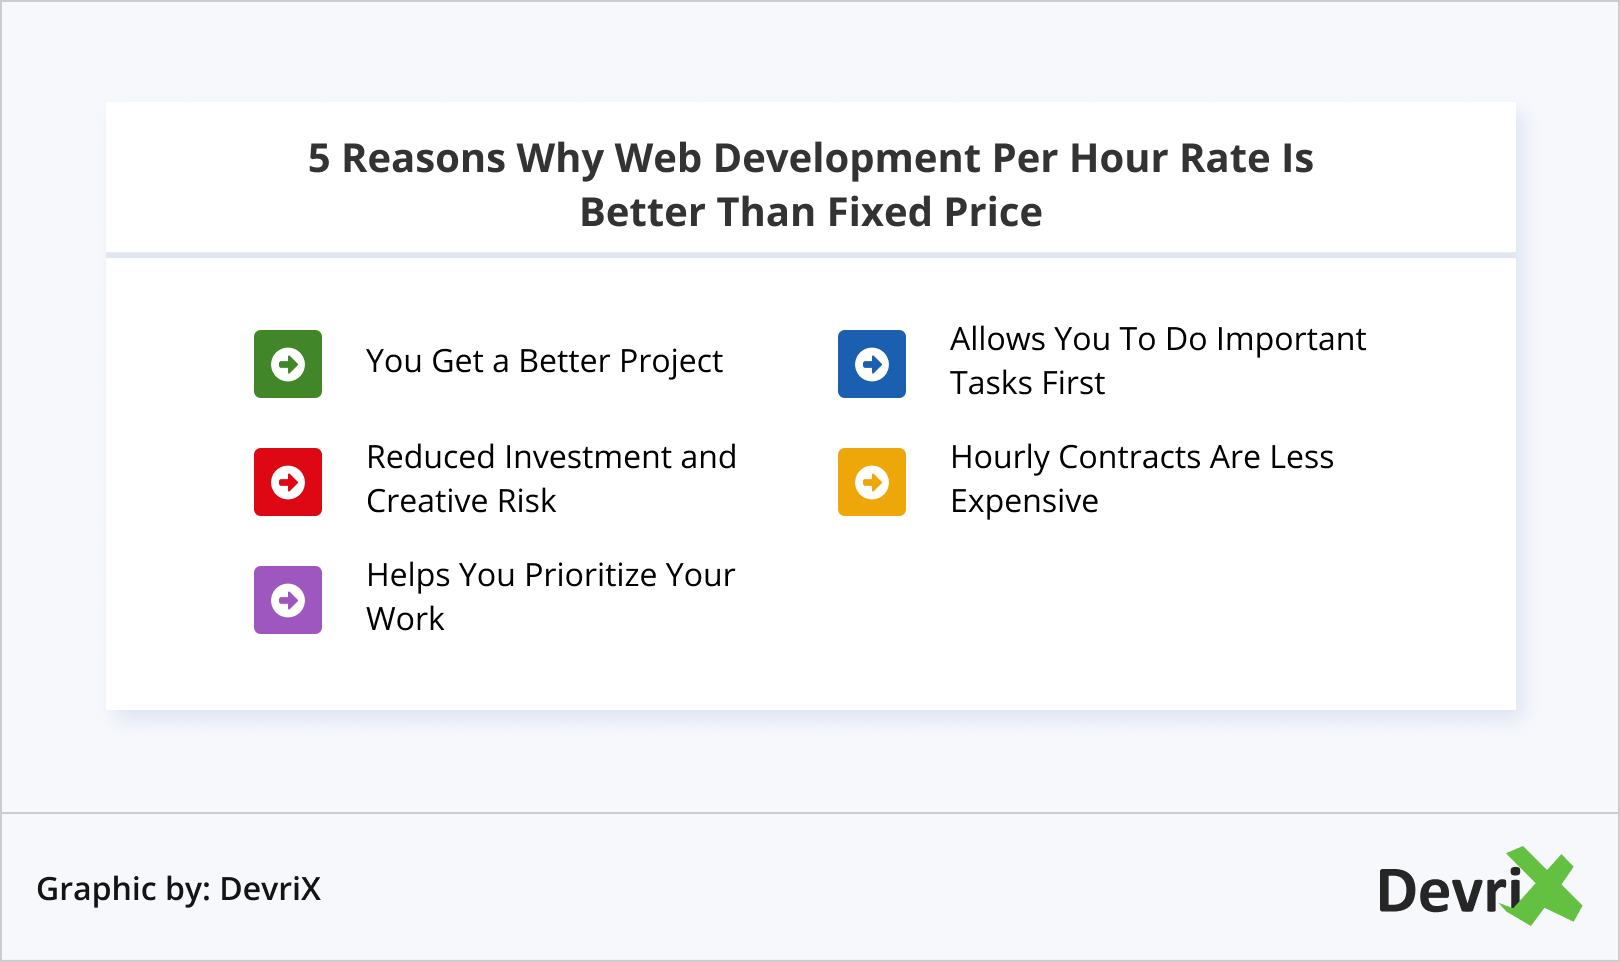 5 Reasons Why Web Development Per Hour Rate Is Better Than Fixed Price